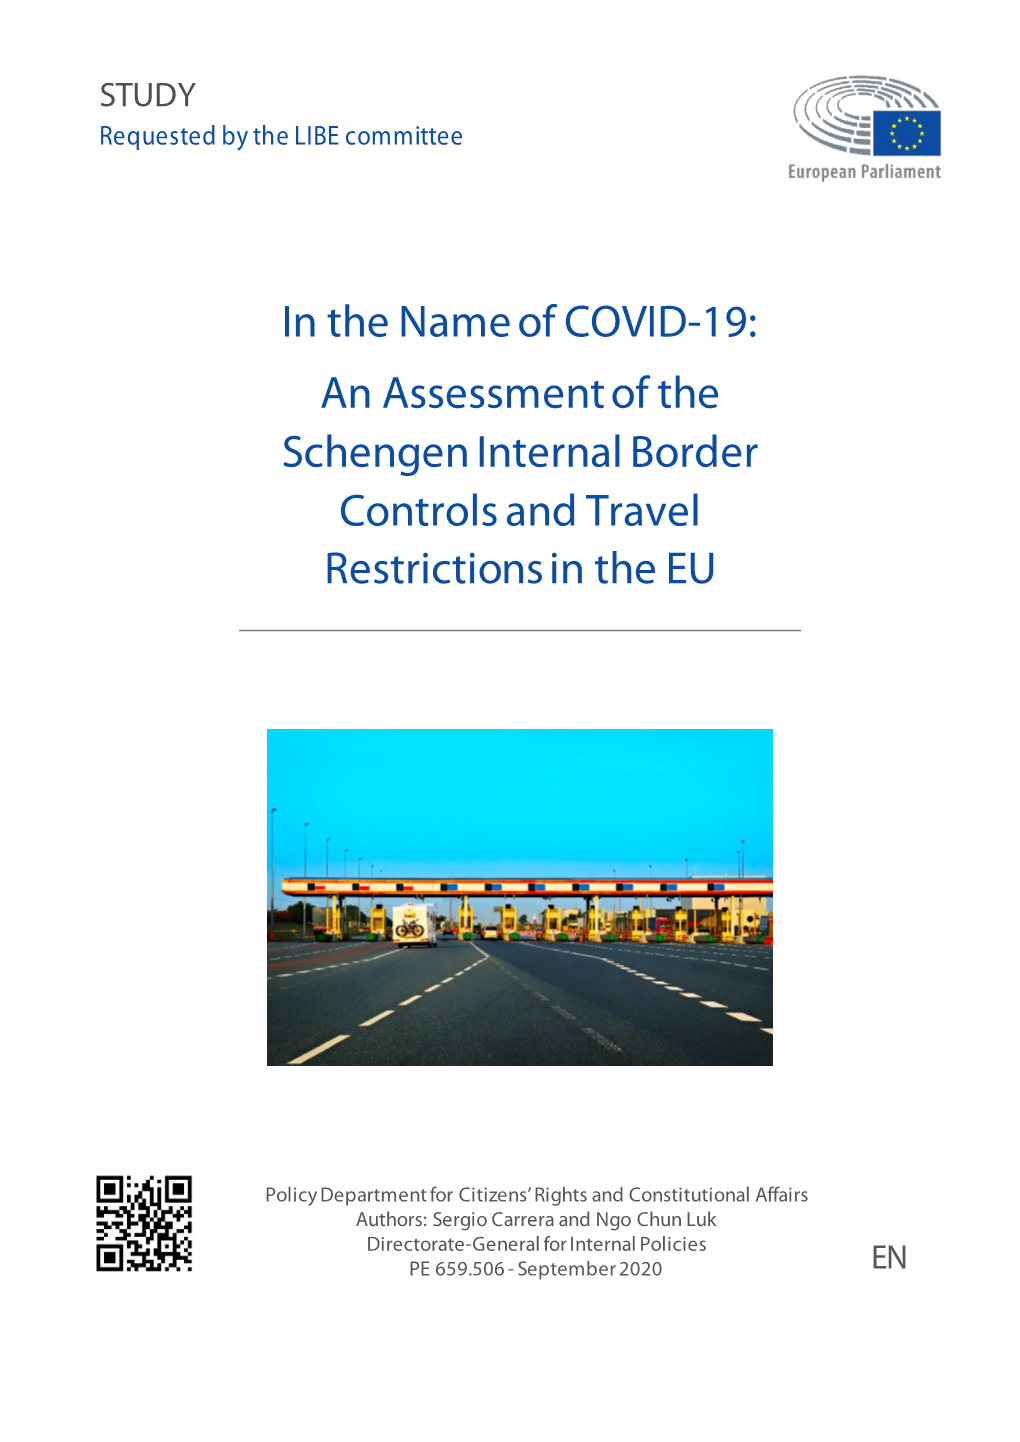 In the Name of COVID-19: Schengen Internal Border Controls and Travel Restrictions in the EU